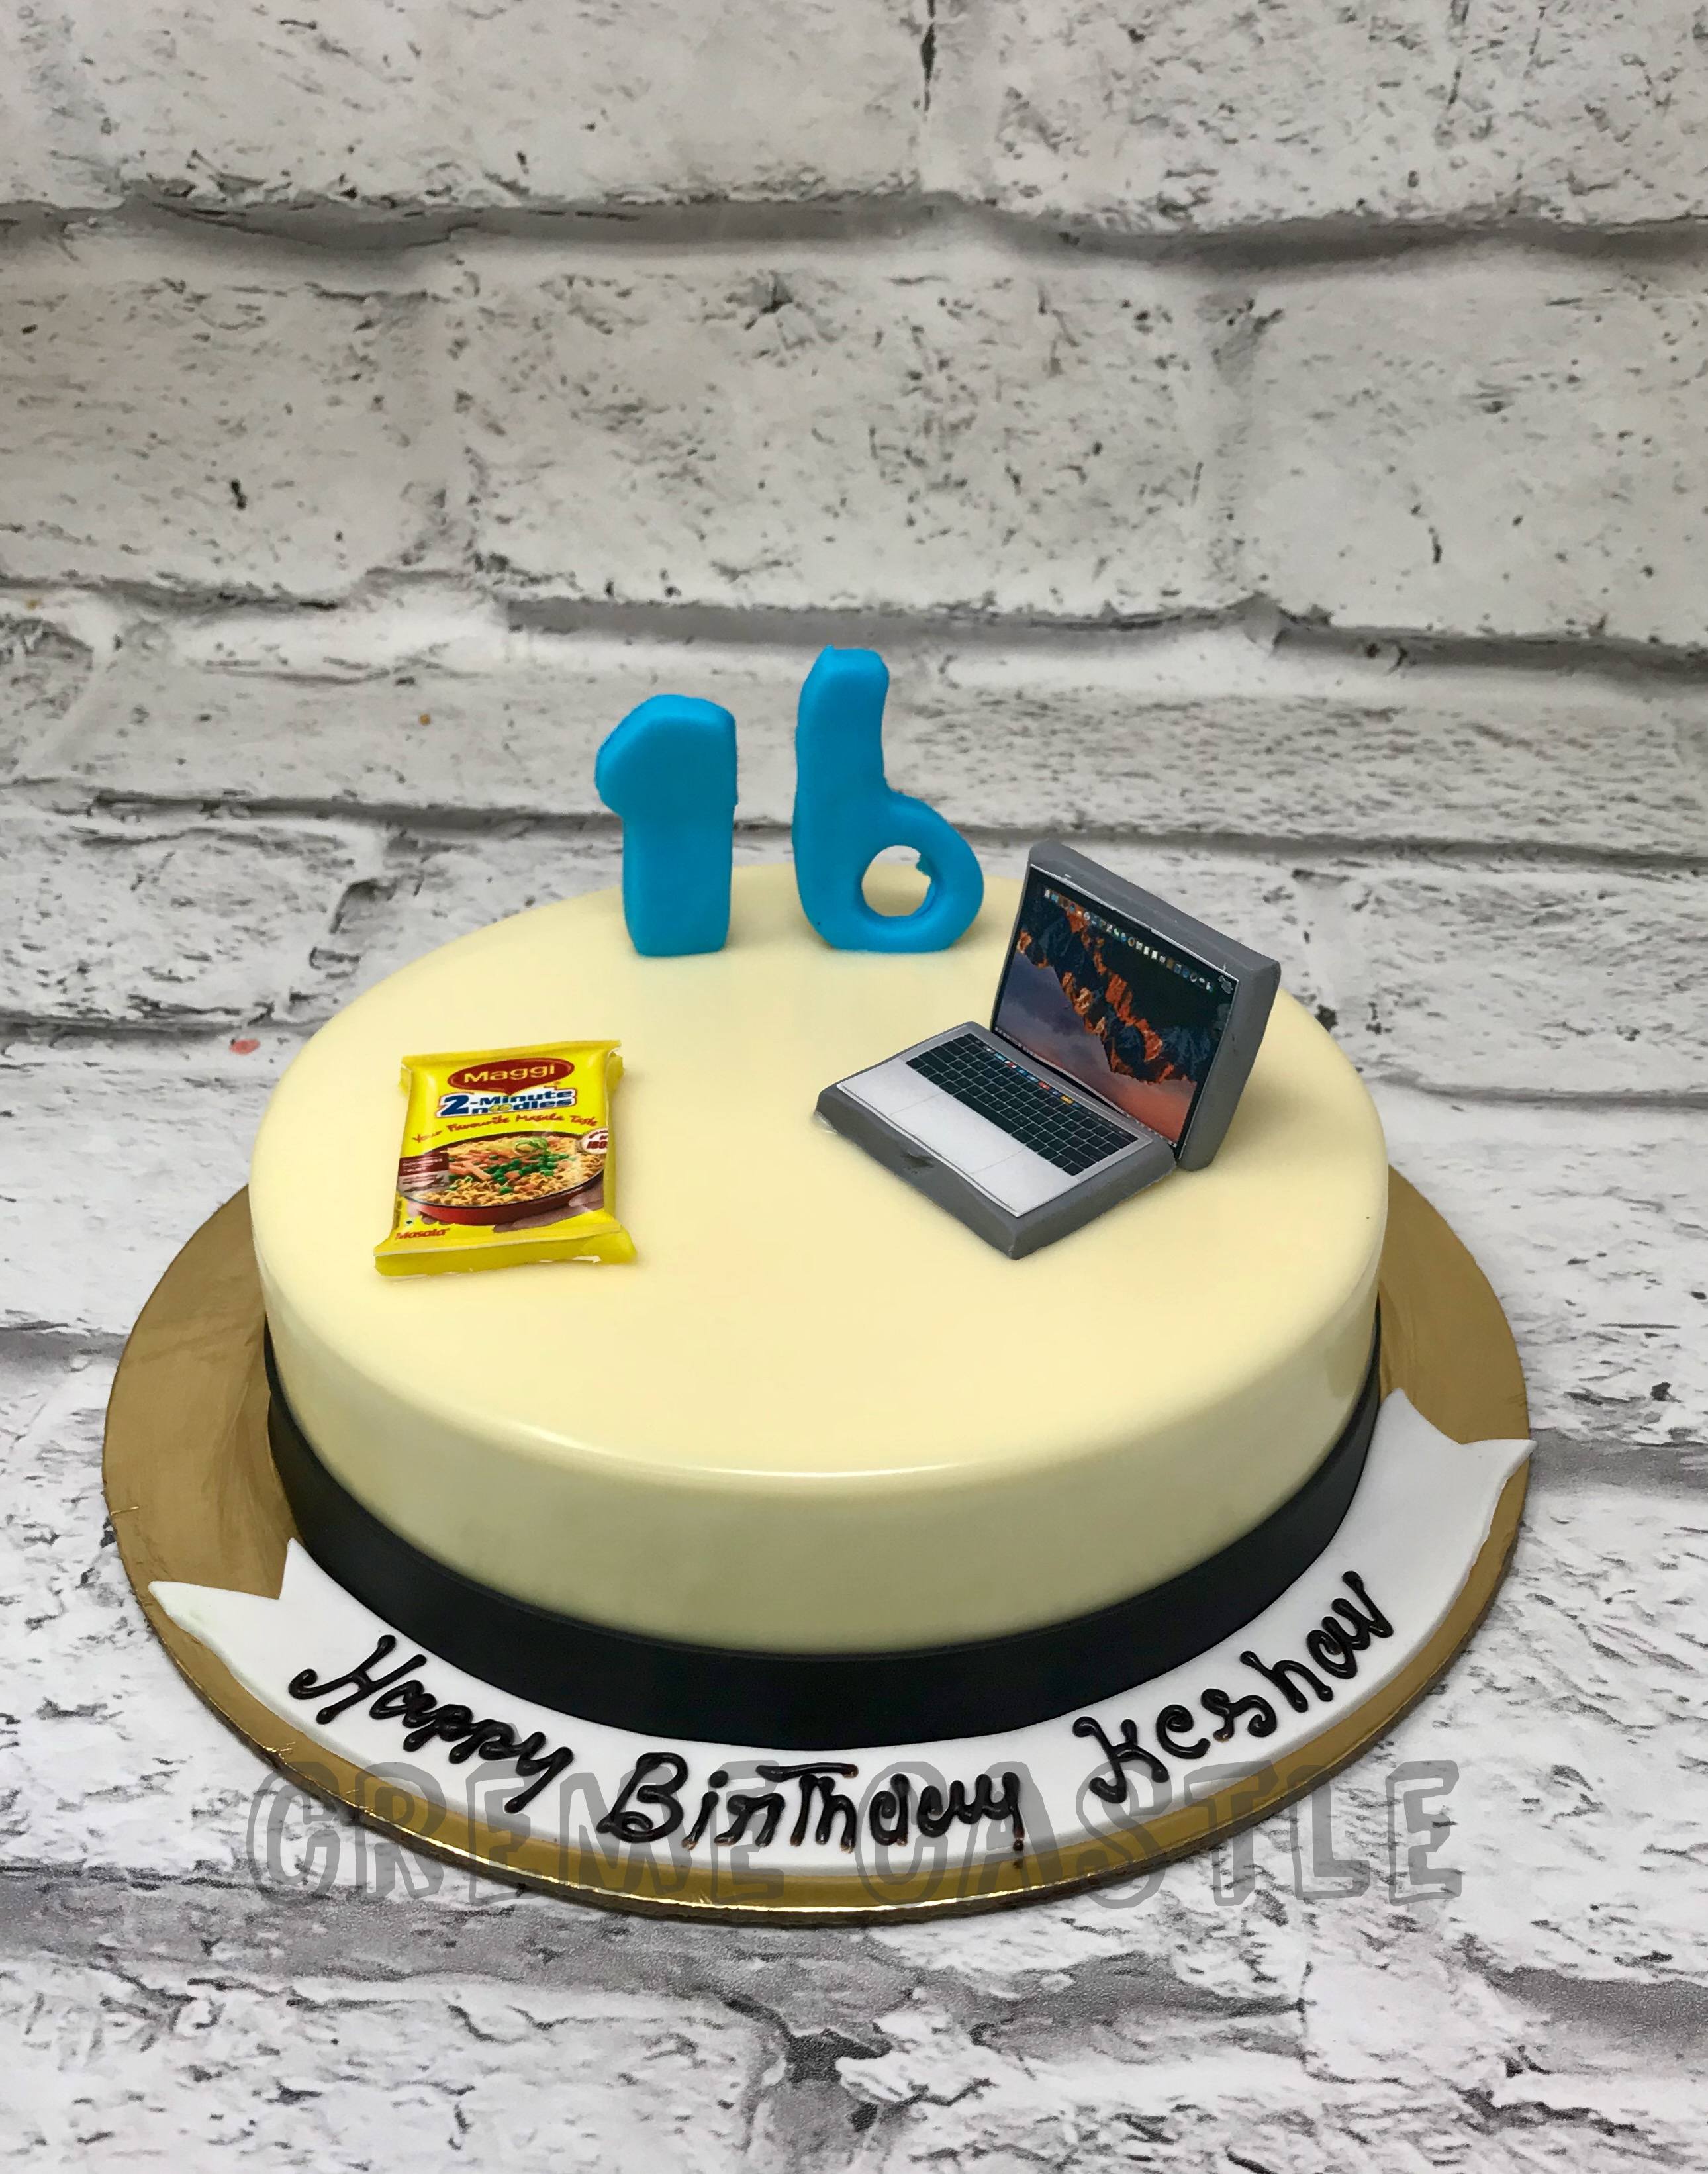 Software engineer theme cake | By Praisy's Pâtisserie | Facebook